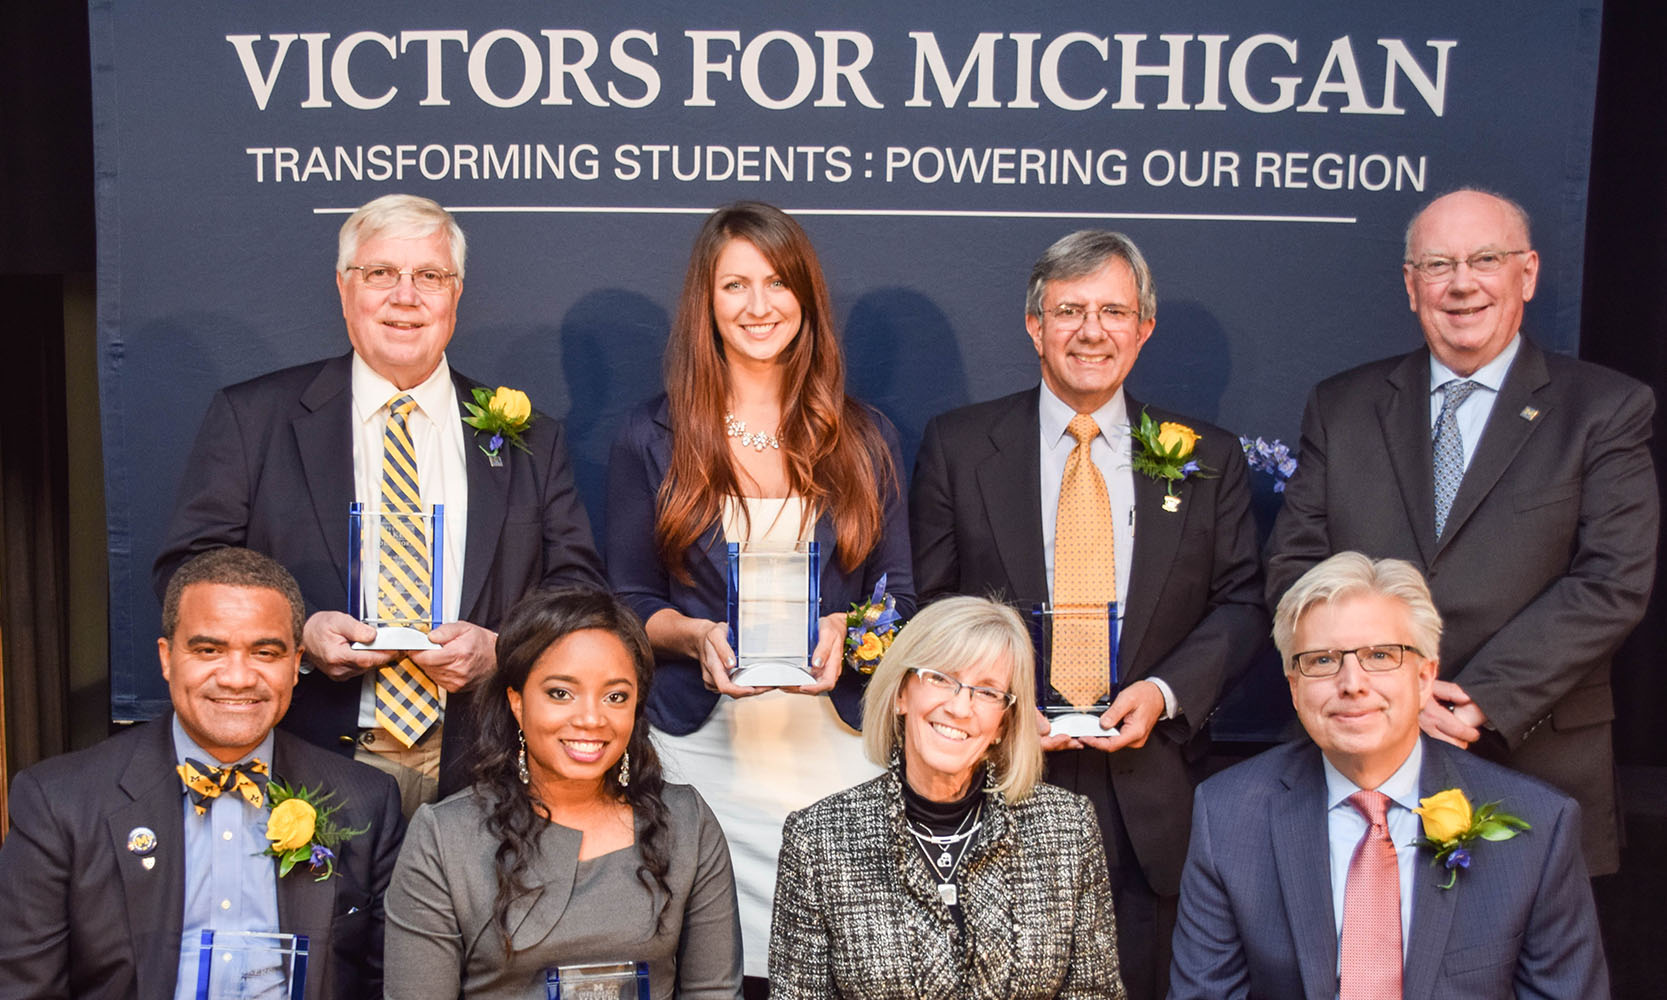 7 Alumni Difference Makers pose with the Chancellor in front of a Victors For Michigan, Transforming Students: Powering Our Region banner.